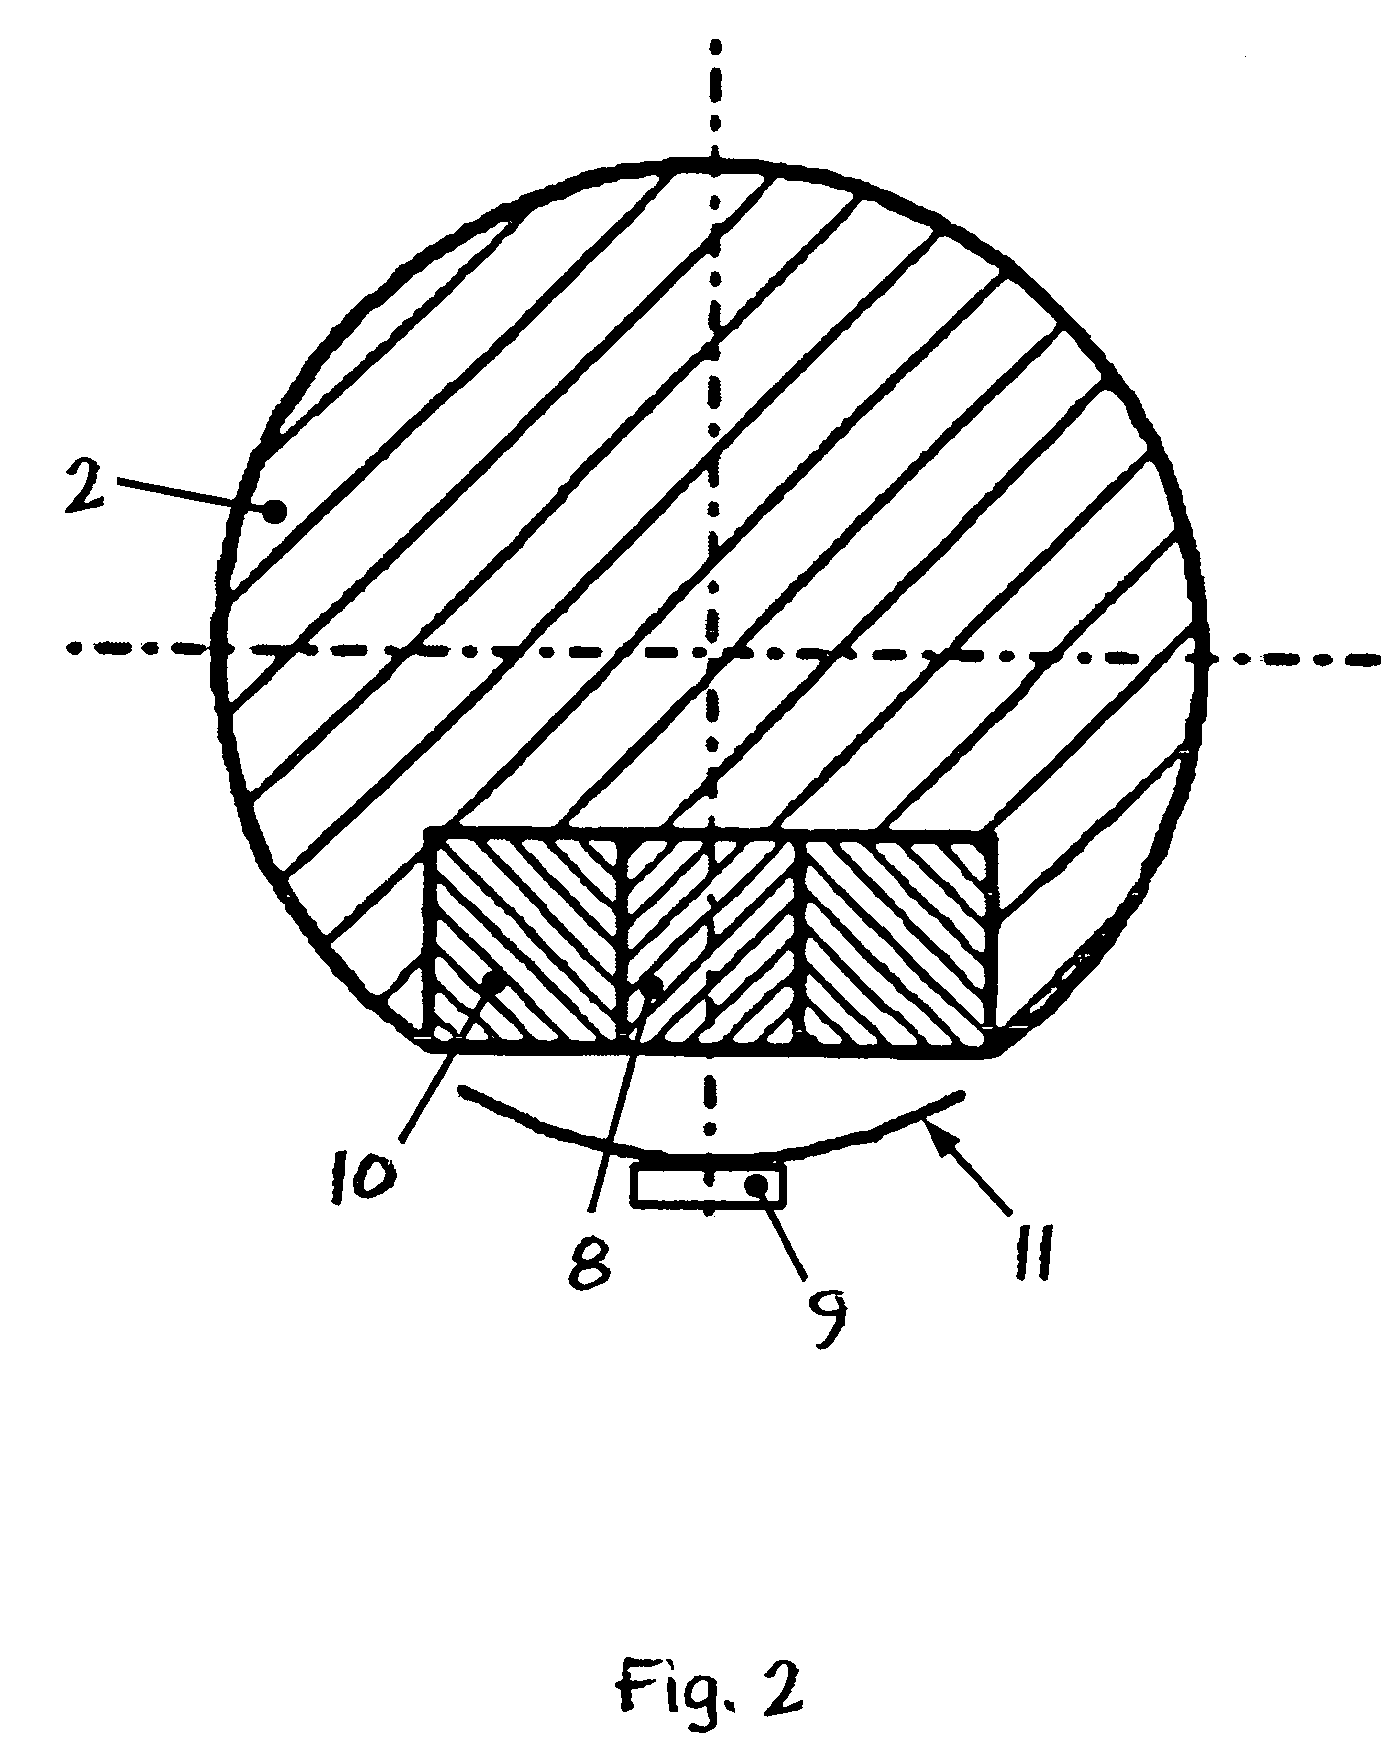 Ball and socket joint with pivoting angle sensor for detecting the relative angular position of the joint housing and the ball pivot